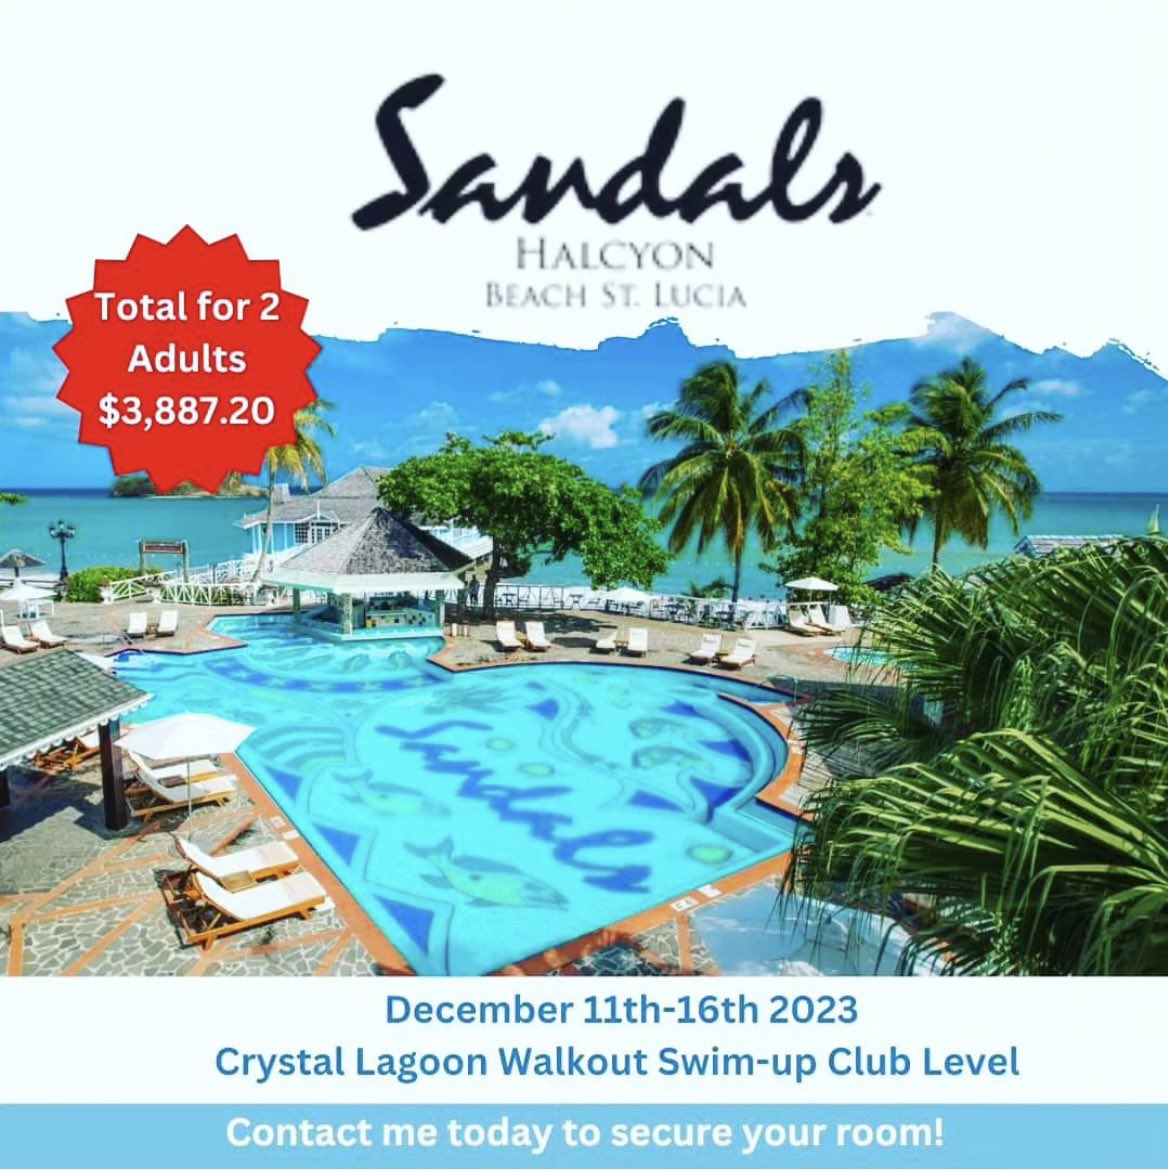 Who wants to head to St. Lucia for an early holiday trip?? 
Contact me today to check into pricing for your preferred dates or properties.
#vacationsbybarbie #takethetrip 
#sandals #stlucia #luxurytravel #allinclusiveresort #allinclusive #travel #travelagent #sandalsresorts